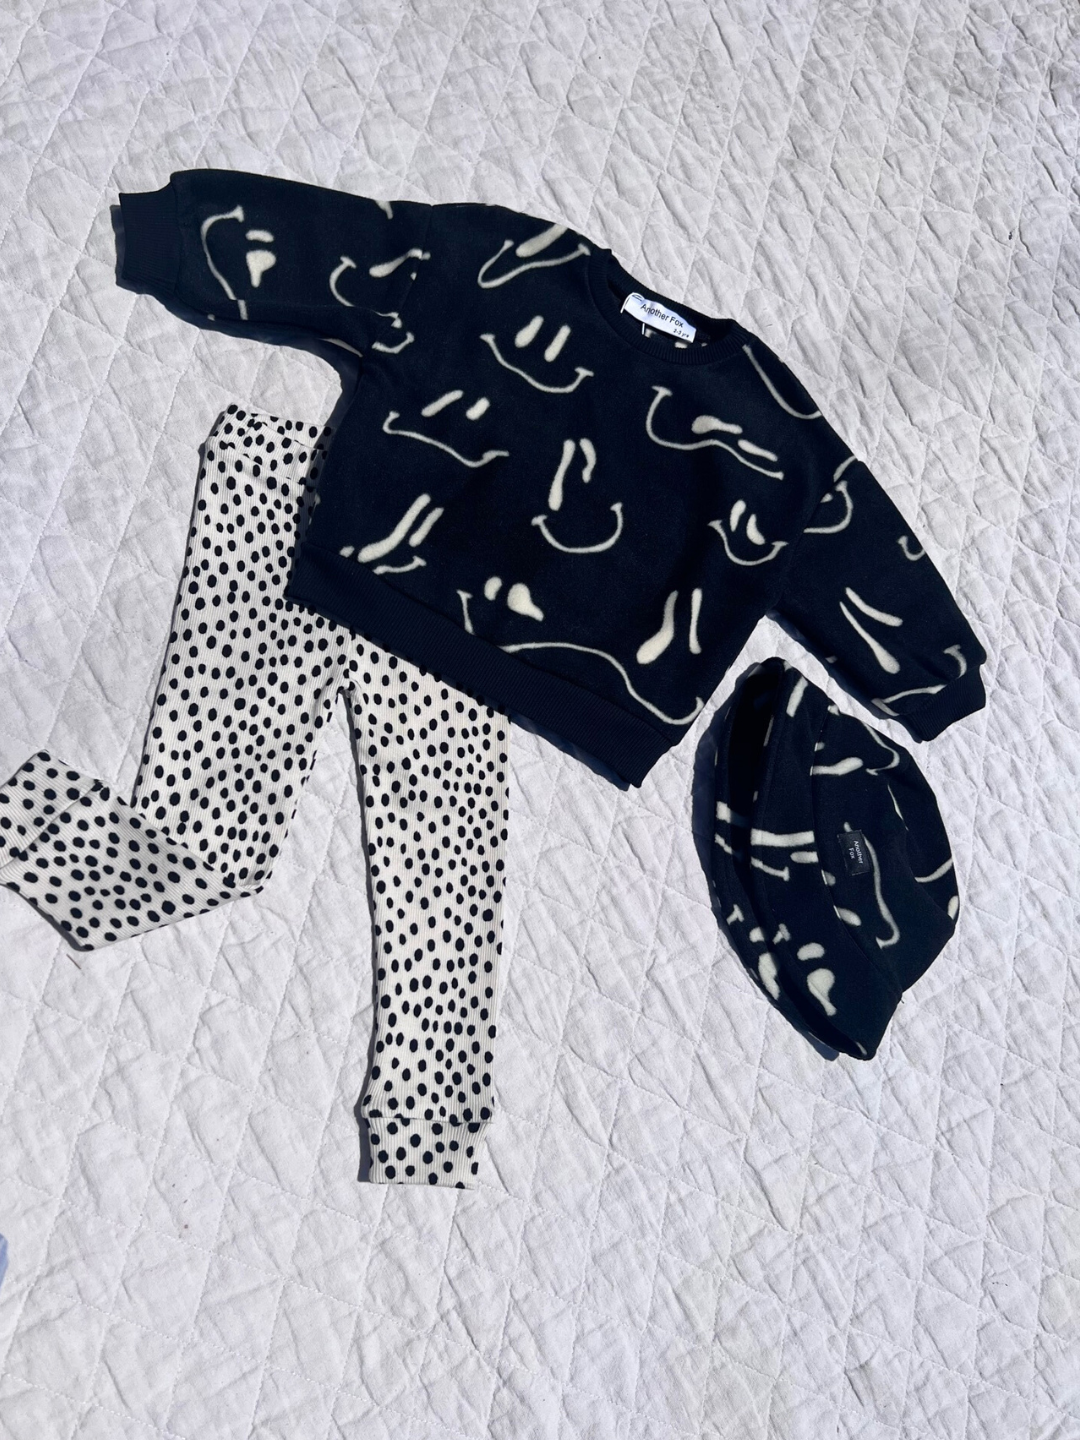 A kids' outfit laid out on a quilt, showing a pair of kids' leggings in a black and white mini cheetah dot print, with a Wavy Grin Fleece Sweatshirt and matching bucket hat in black and white